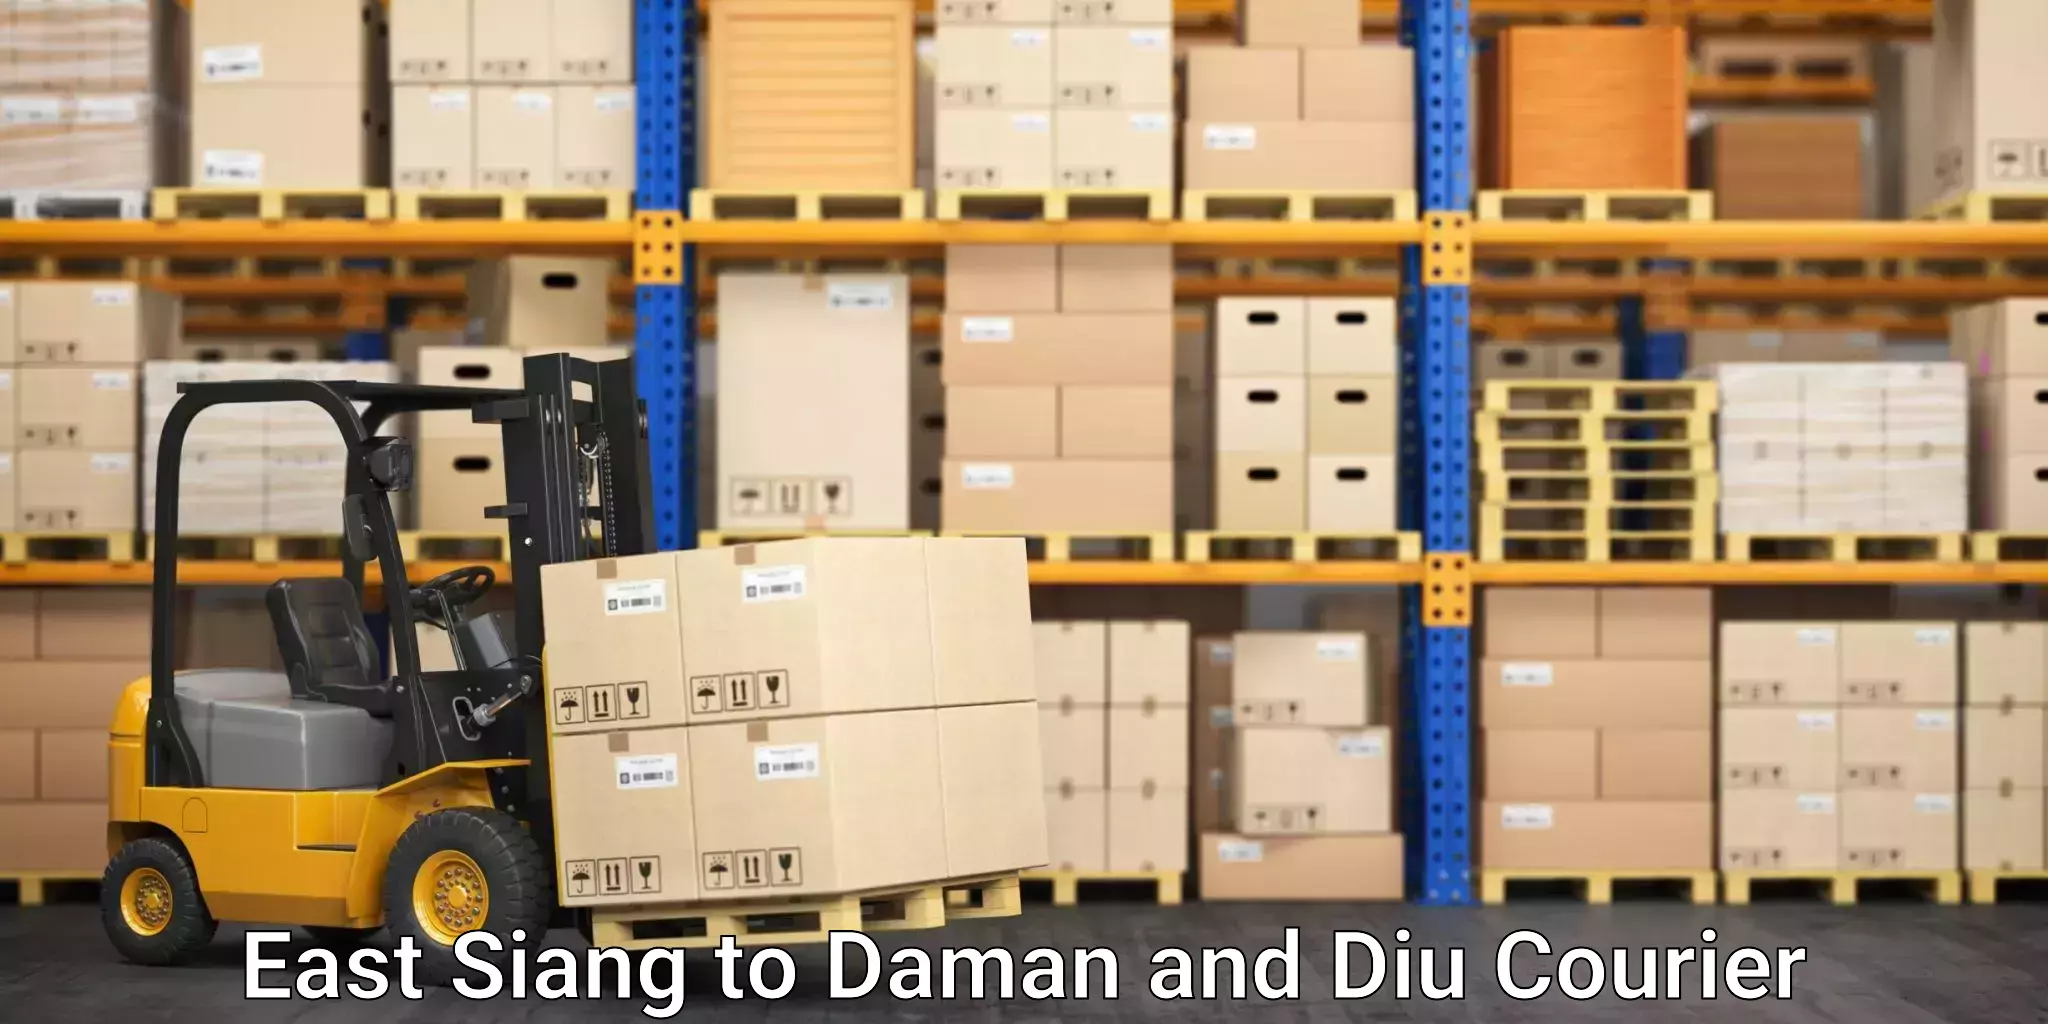 International parcel service East Siang to Daman and Diu